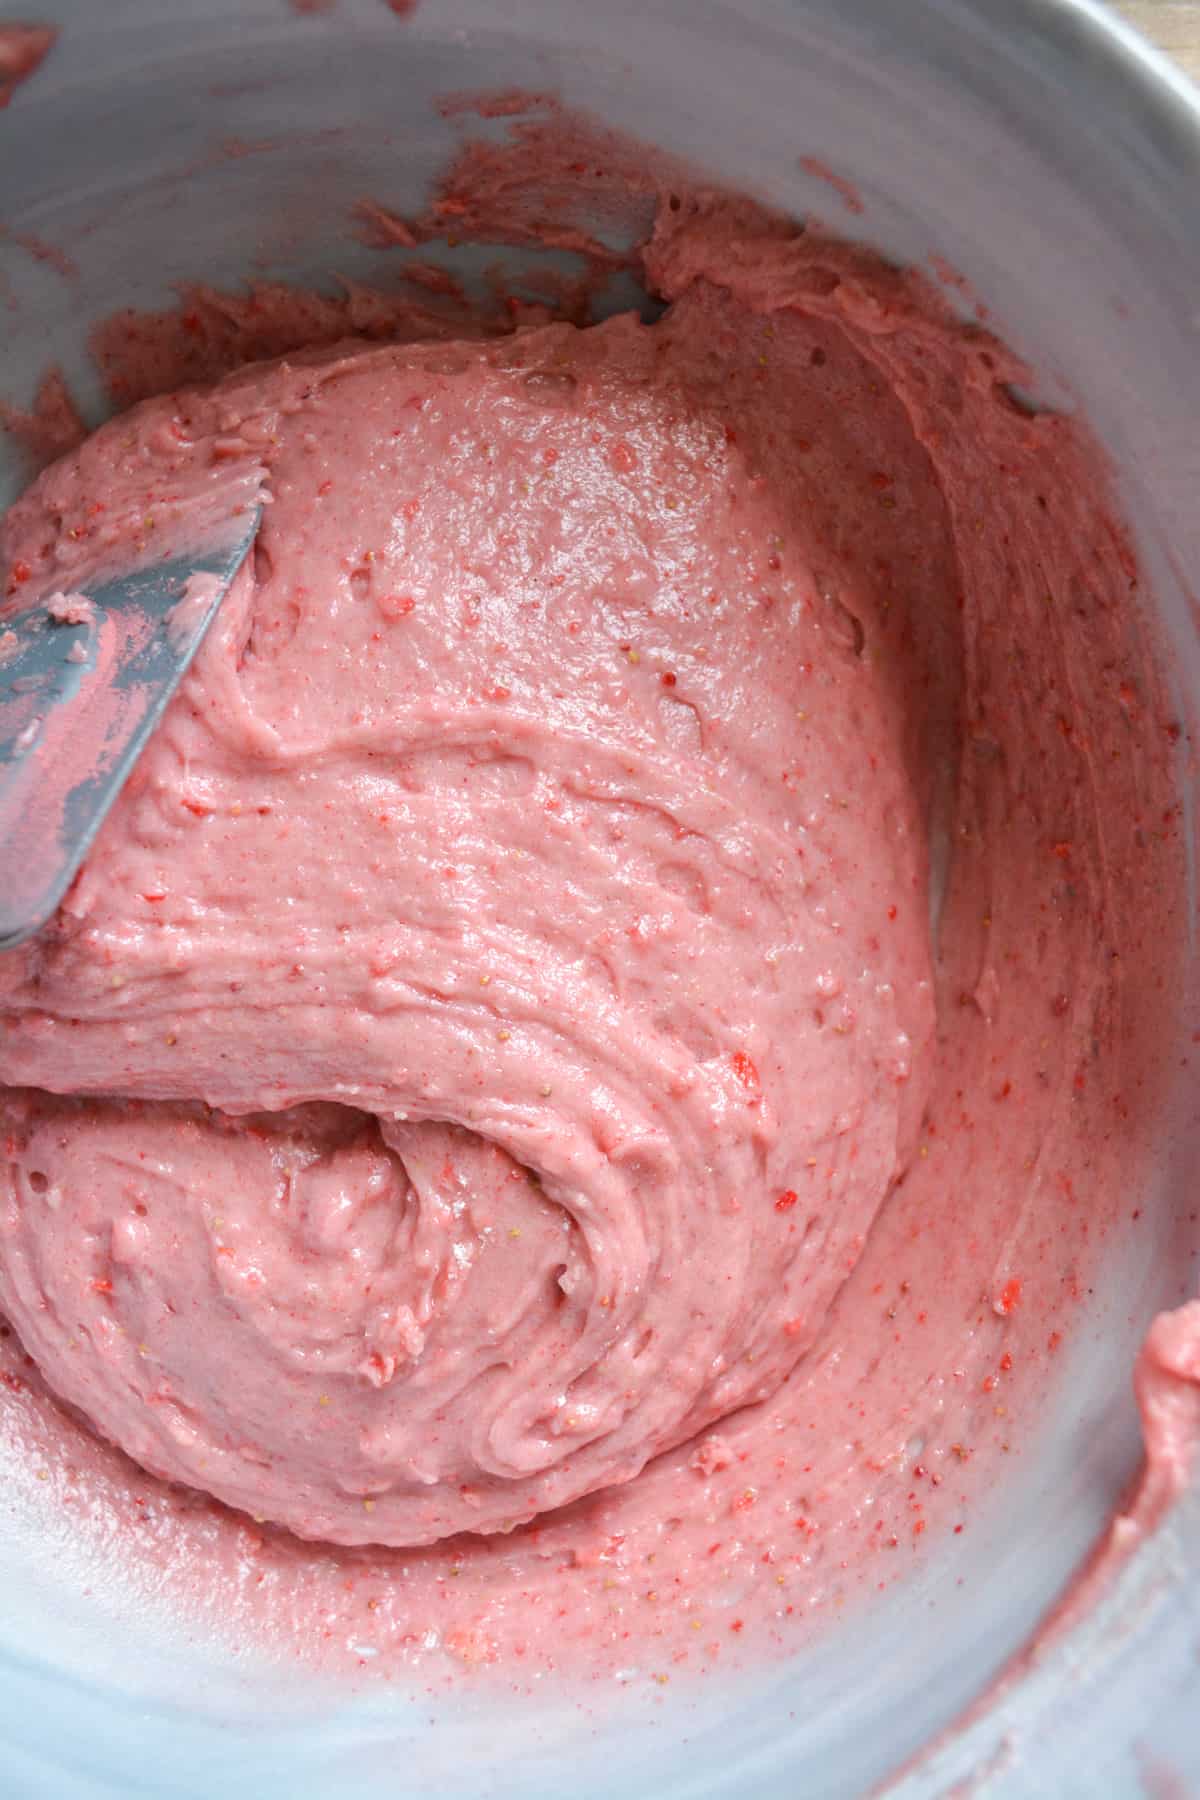 Strawberry cupcake batter in a mixing bowl with a rubber spatula toward the left of the bowl.